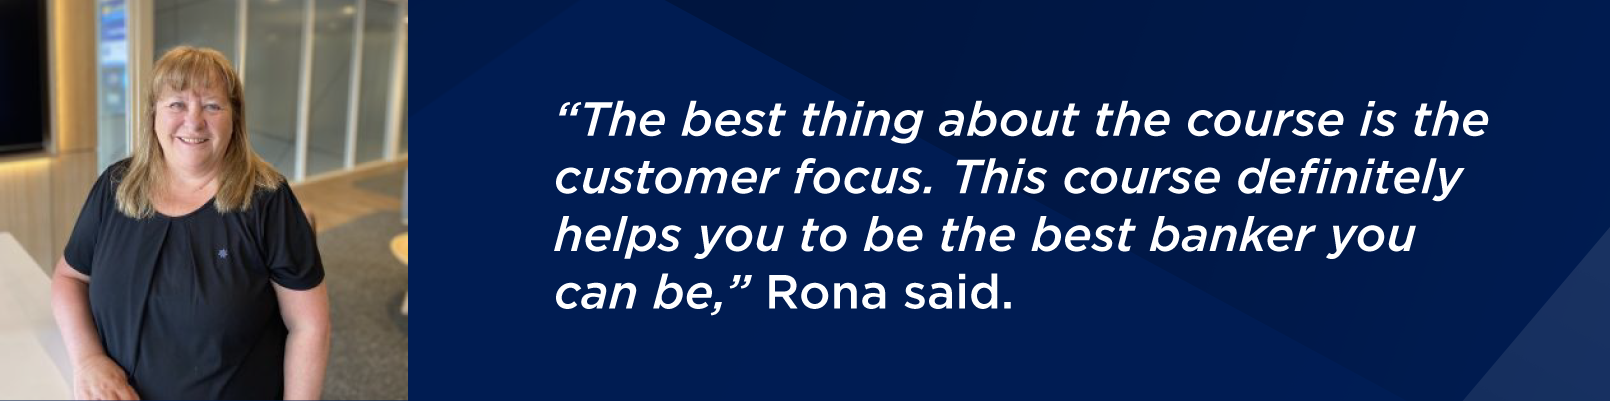 “The best thing about the course is the customer focus. This course definitely helps you to be the best banker you can be,” Rona said.